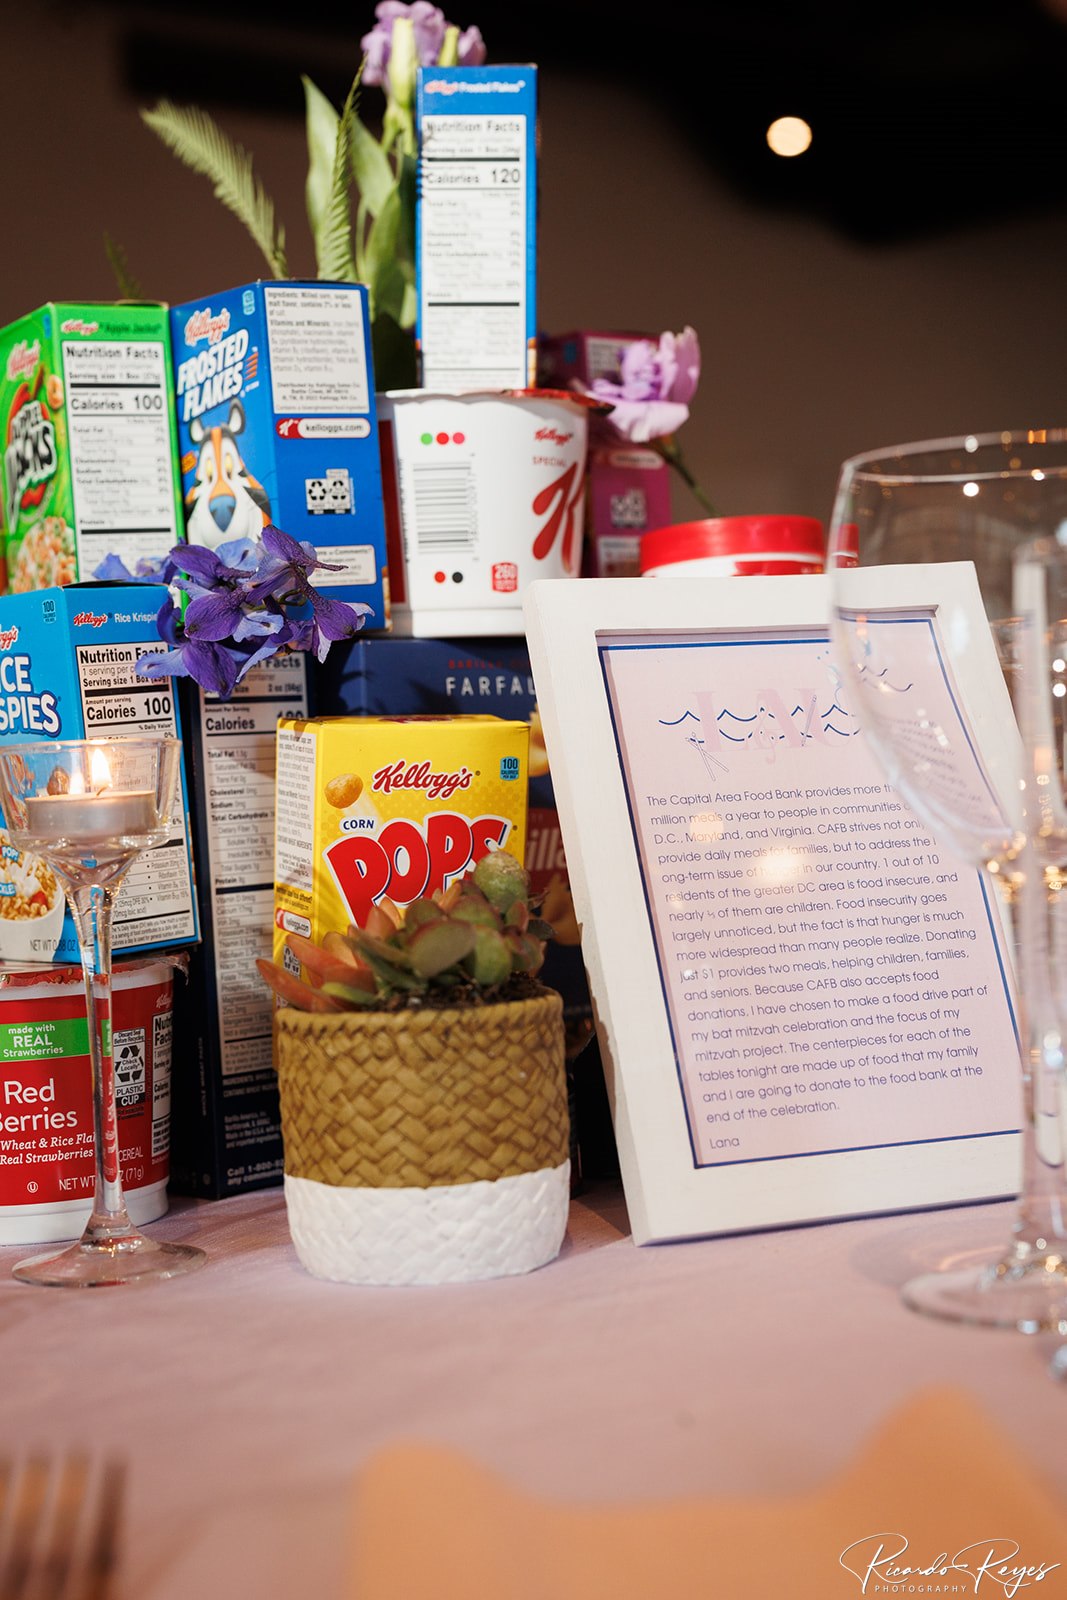 Community service donated centerpieces and custom table number for Lana to a Tea All About Lana Bat Mitzvah Party at VisArts in Rockville, MD | Pop Color Events | Adding a Pop of Color to Bar & Bat Mitzvahs in DC, MD & VA | Photo by: Ricardo Reyes Photography